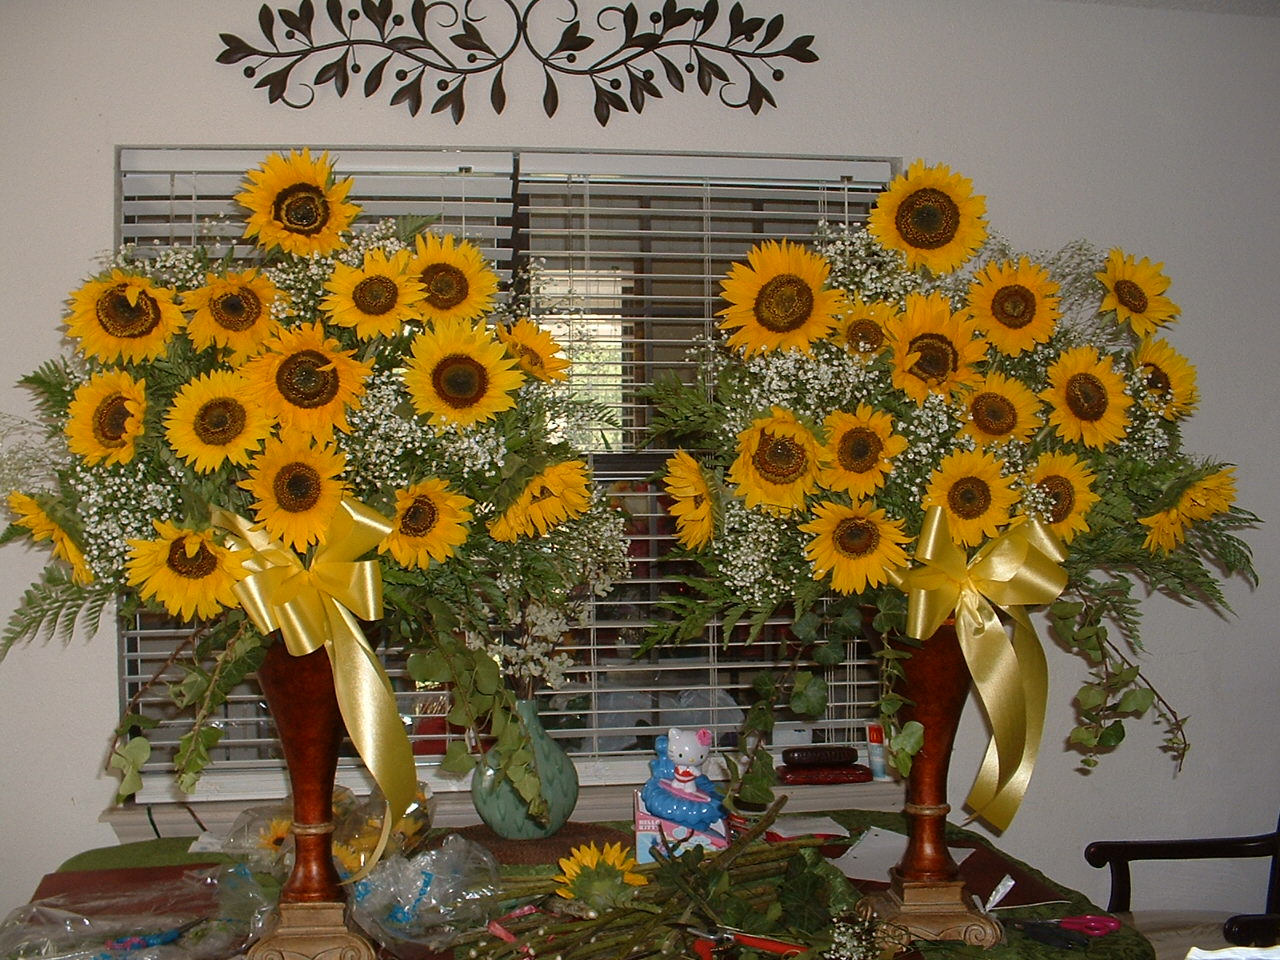 These sunflowers are huge!